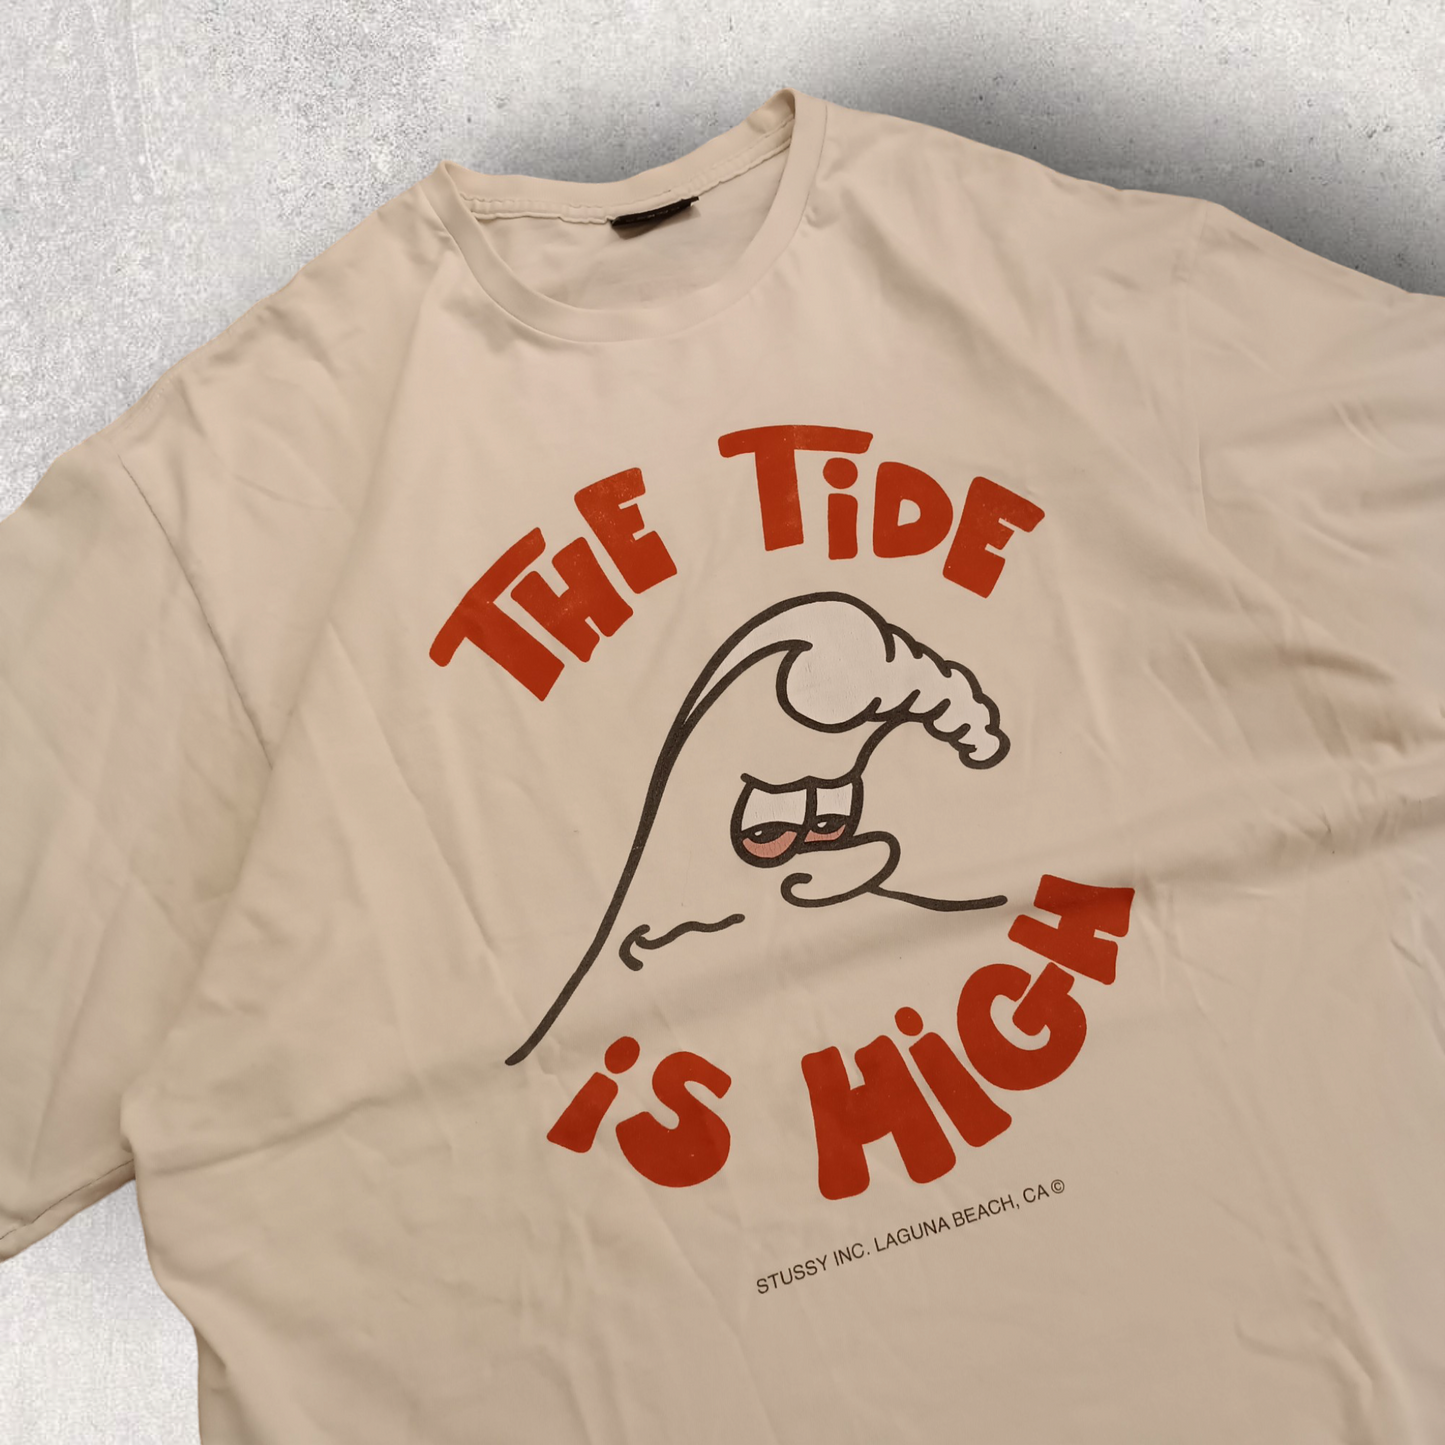 T-shirt Stussy "The Tide is High" - XL